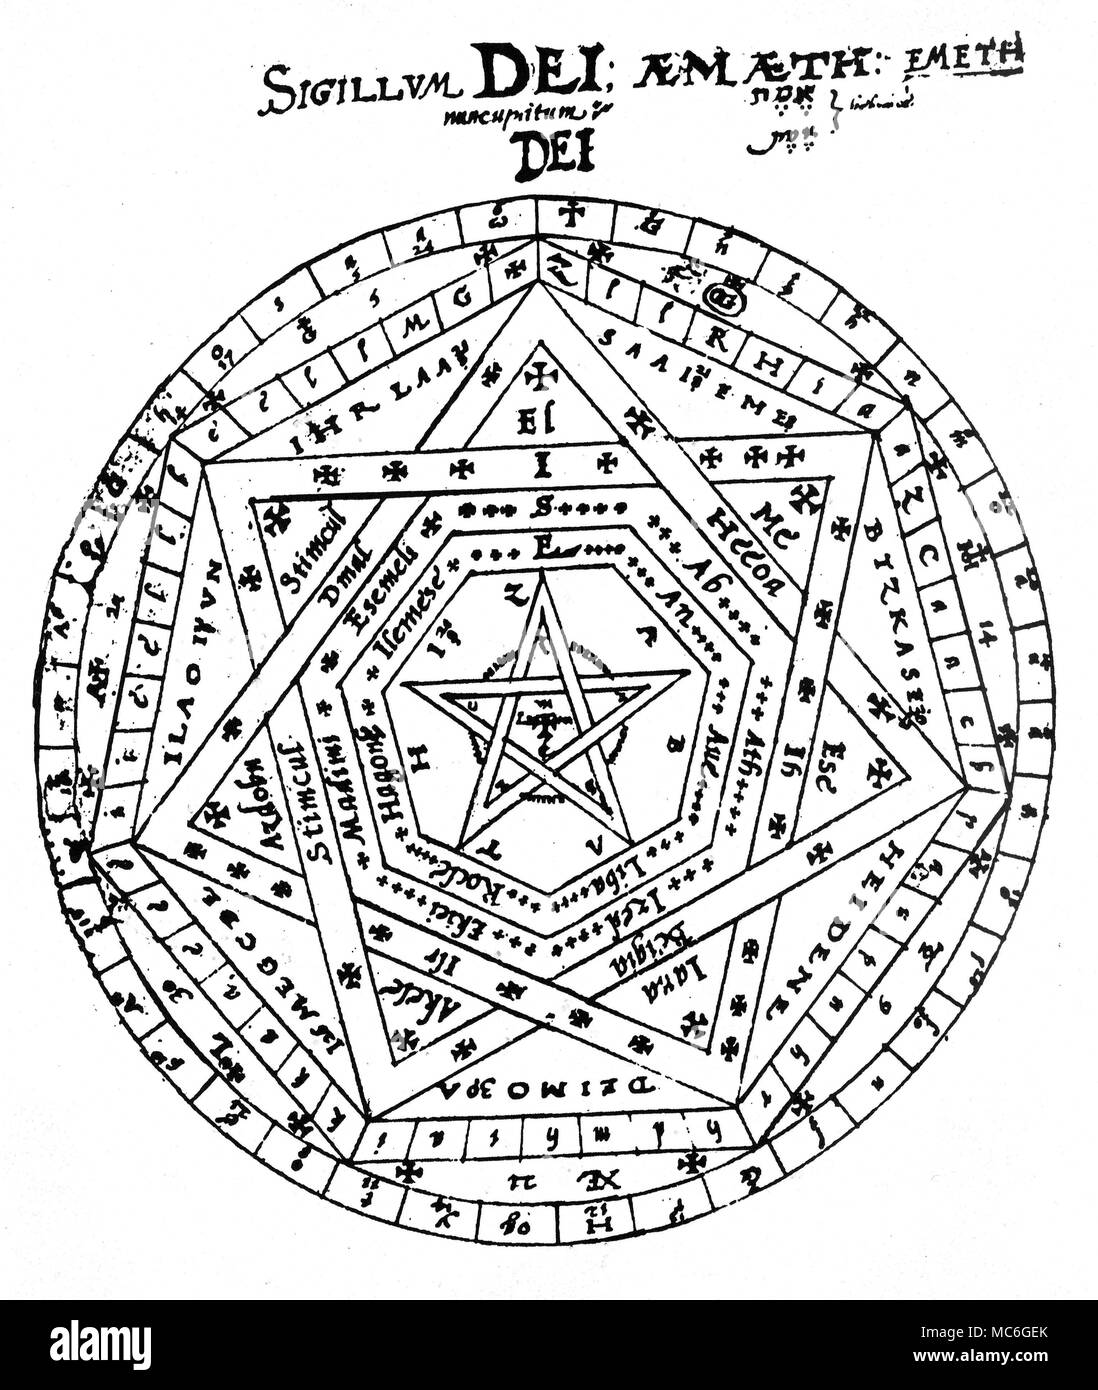 MAGIC SYMBOLS - JOHN DEE'S SIGILLUM - AEMETH The manuscript design for Dr. John Dee's great seal, copied from his own handwritten manuscript of Mysteriorum Liber Primus, in the British Library (Sloane 3188, in the last folio of book II, f. 30r.) in the year 1582. Dee refers to this important Seal as the Sigillum Dei (an ambiguous term, which could means The Sigil of God, but which almost certainly means Dee's Sigil). The complex design is in effect the Seal of Aemaeth, Aemeth, or Emeth, which figures in the magical system of John Dee, and which was incorporated (often in a truncated form) Stock Photo